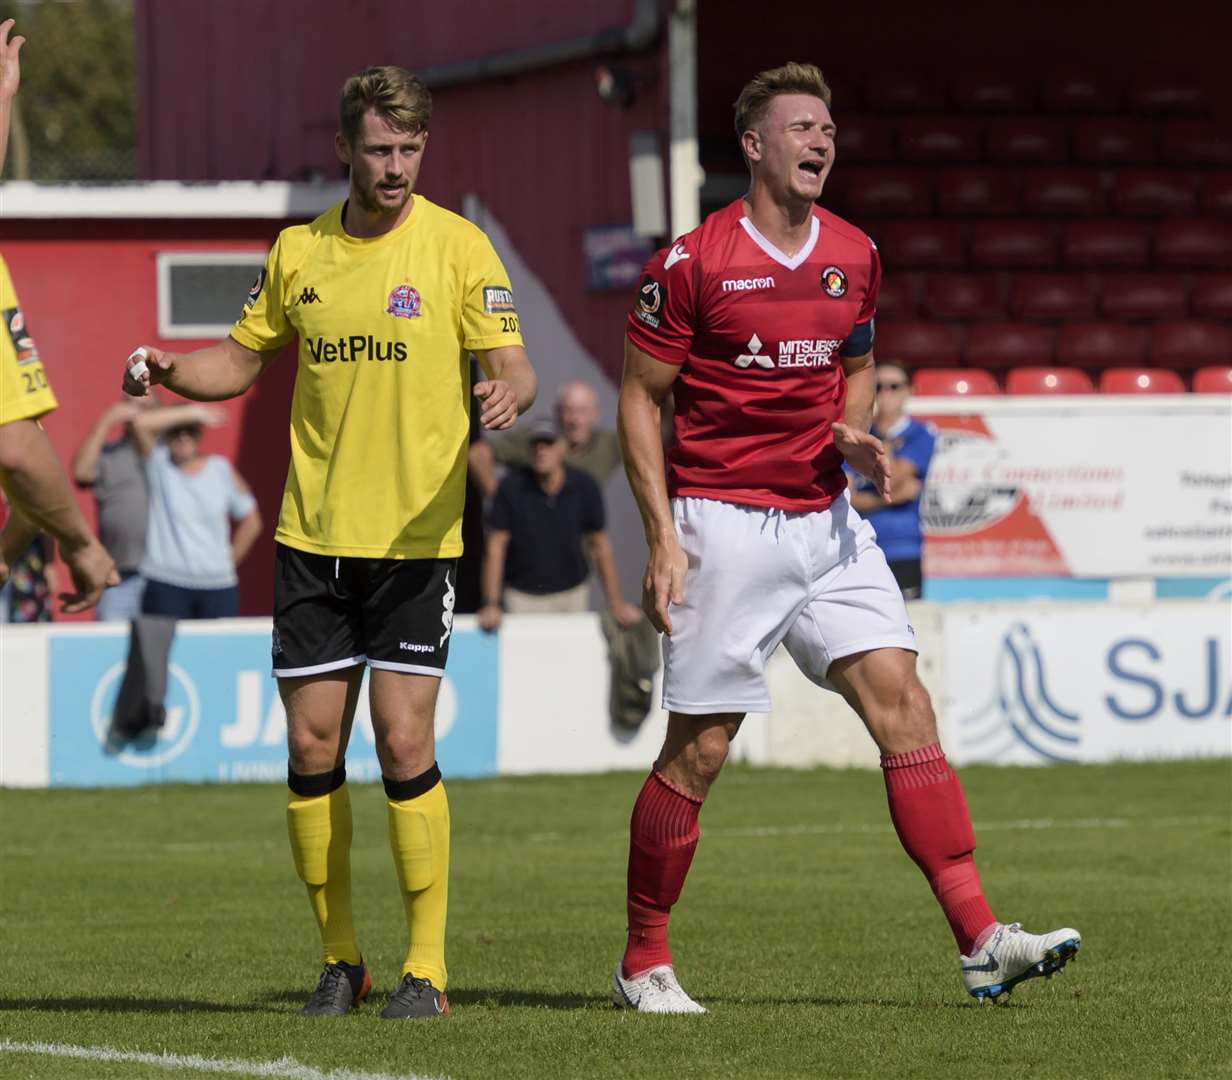 Experienced defender Dave Winfield joins Ebbsfleet United from